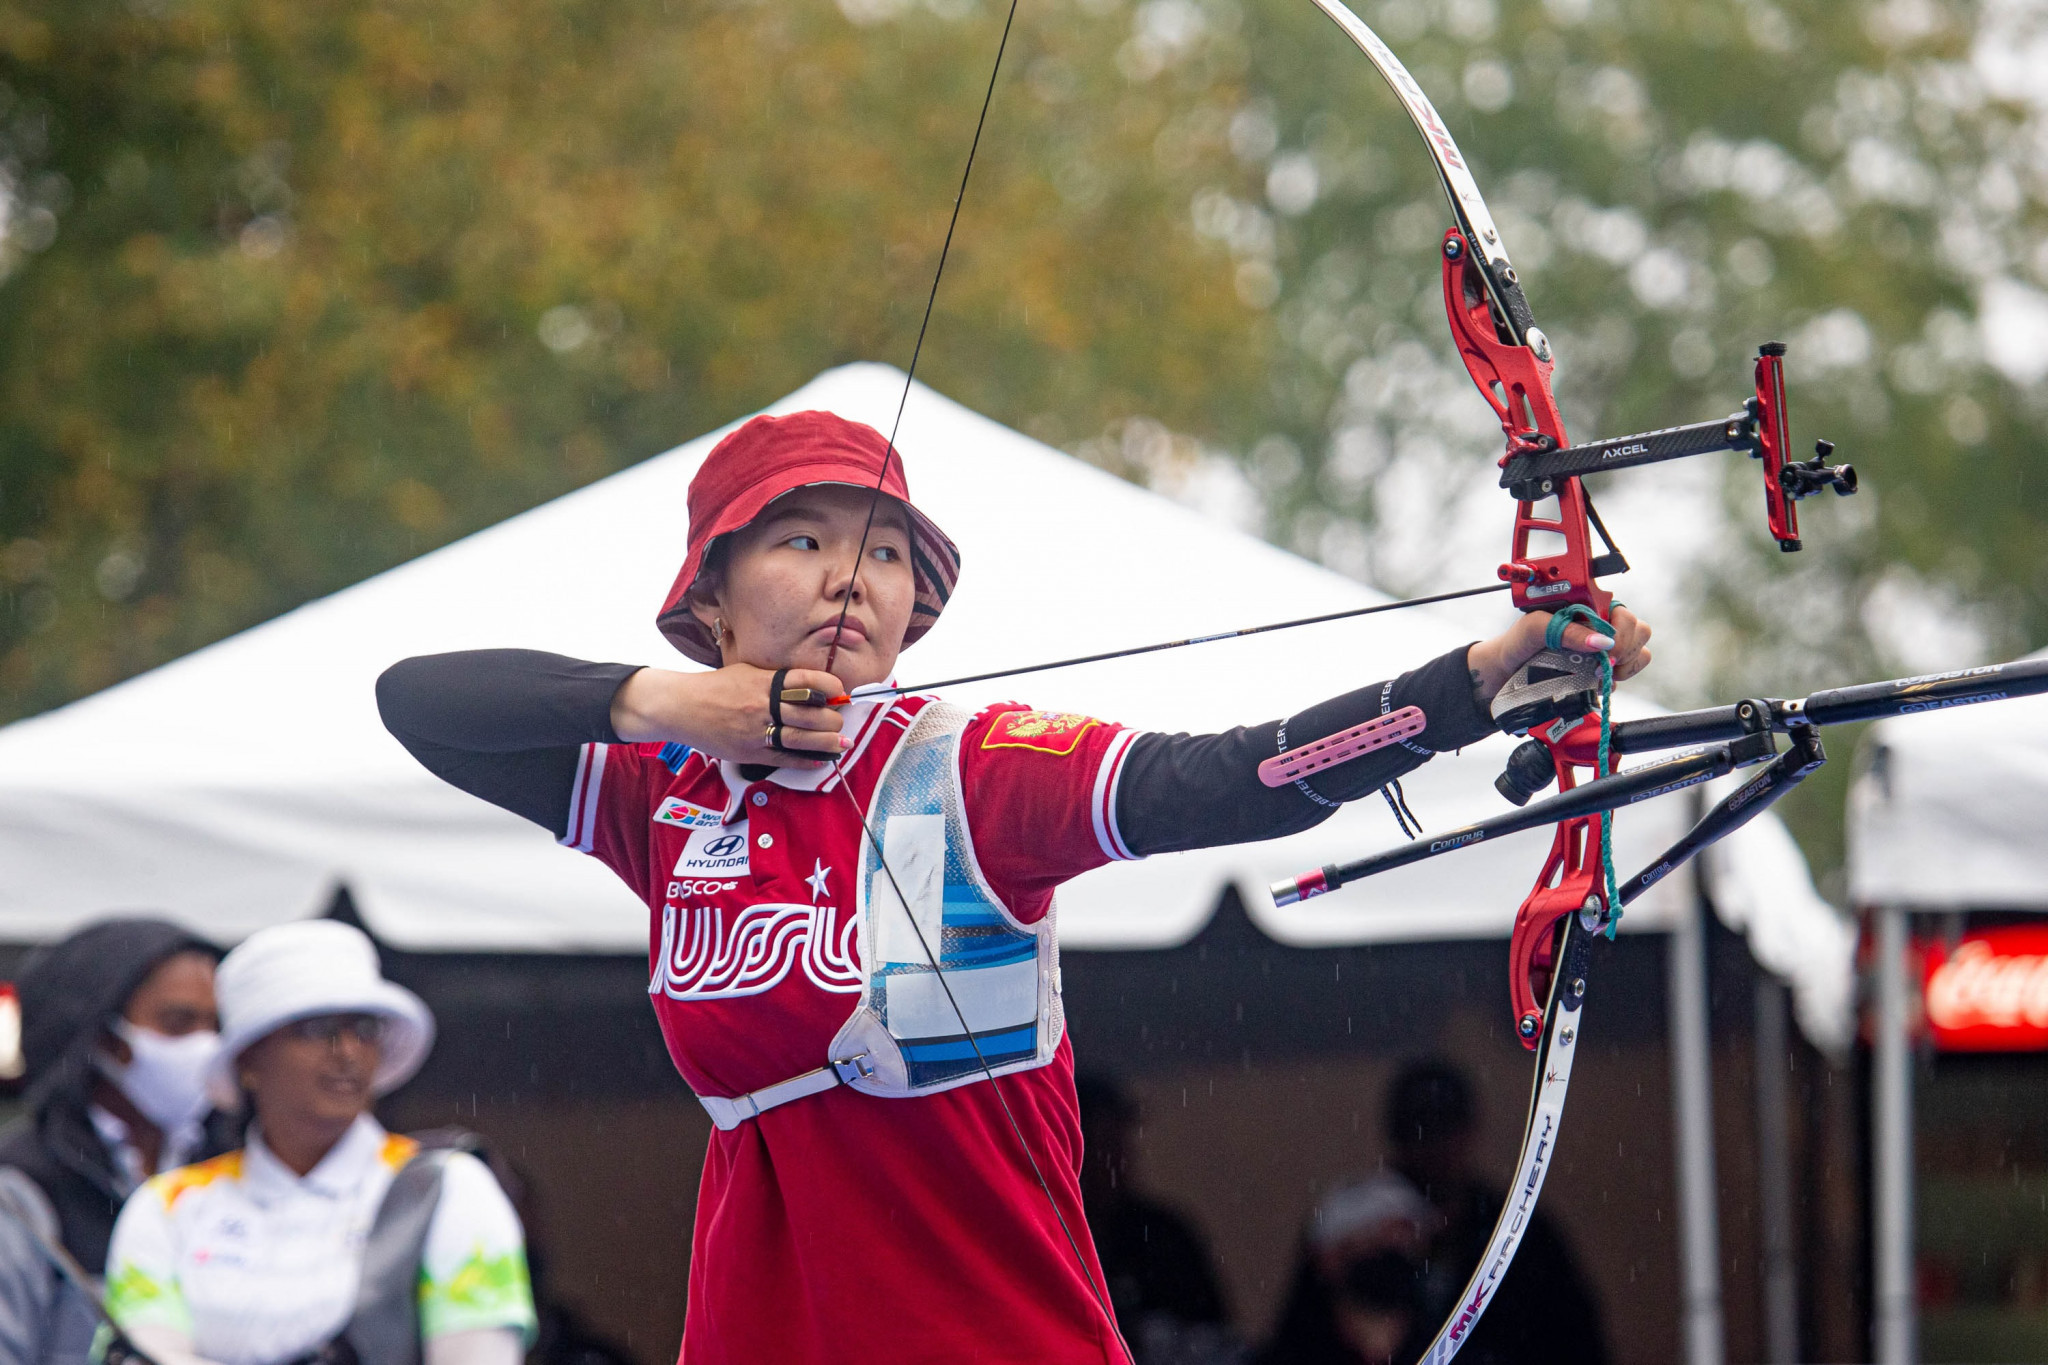 
World Archery has said that it will work with the IOC and the ASOIF for an independent review process to confirm the return of neutral individuals to events ©Getty Images